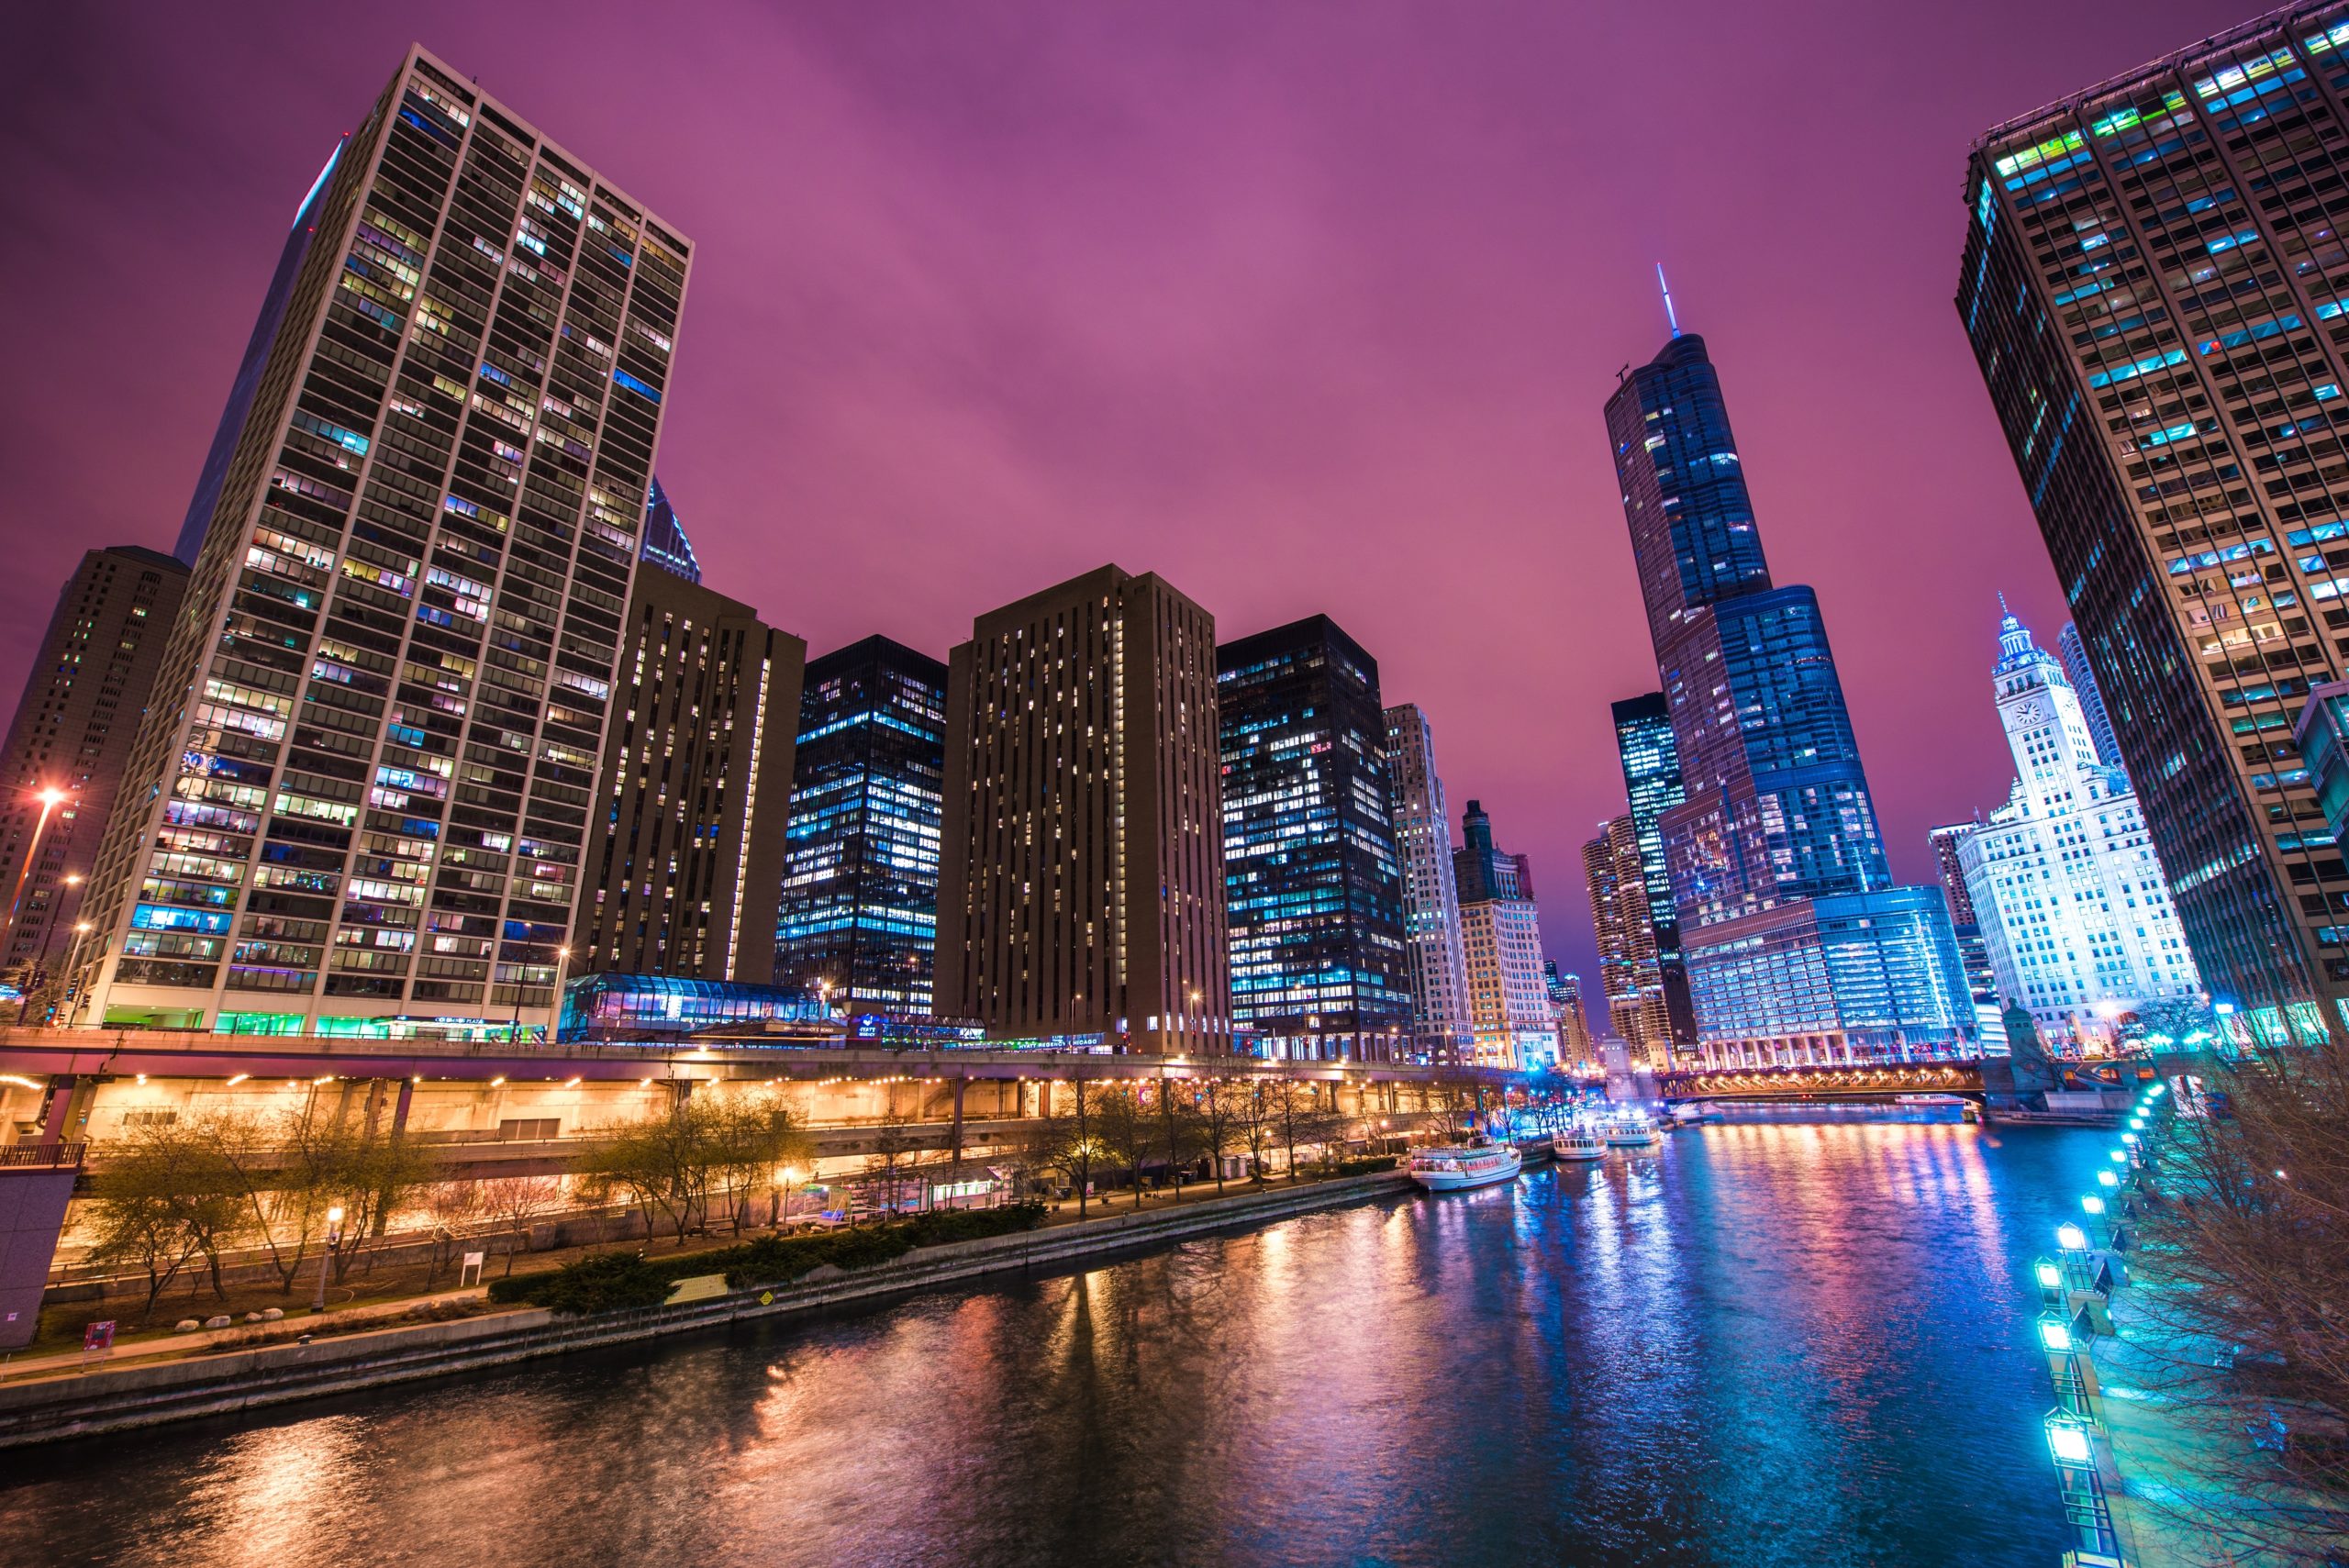 Chicago river at night offers a mesmerizing view with the glistening city lights reflecting on the water.